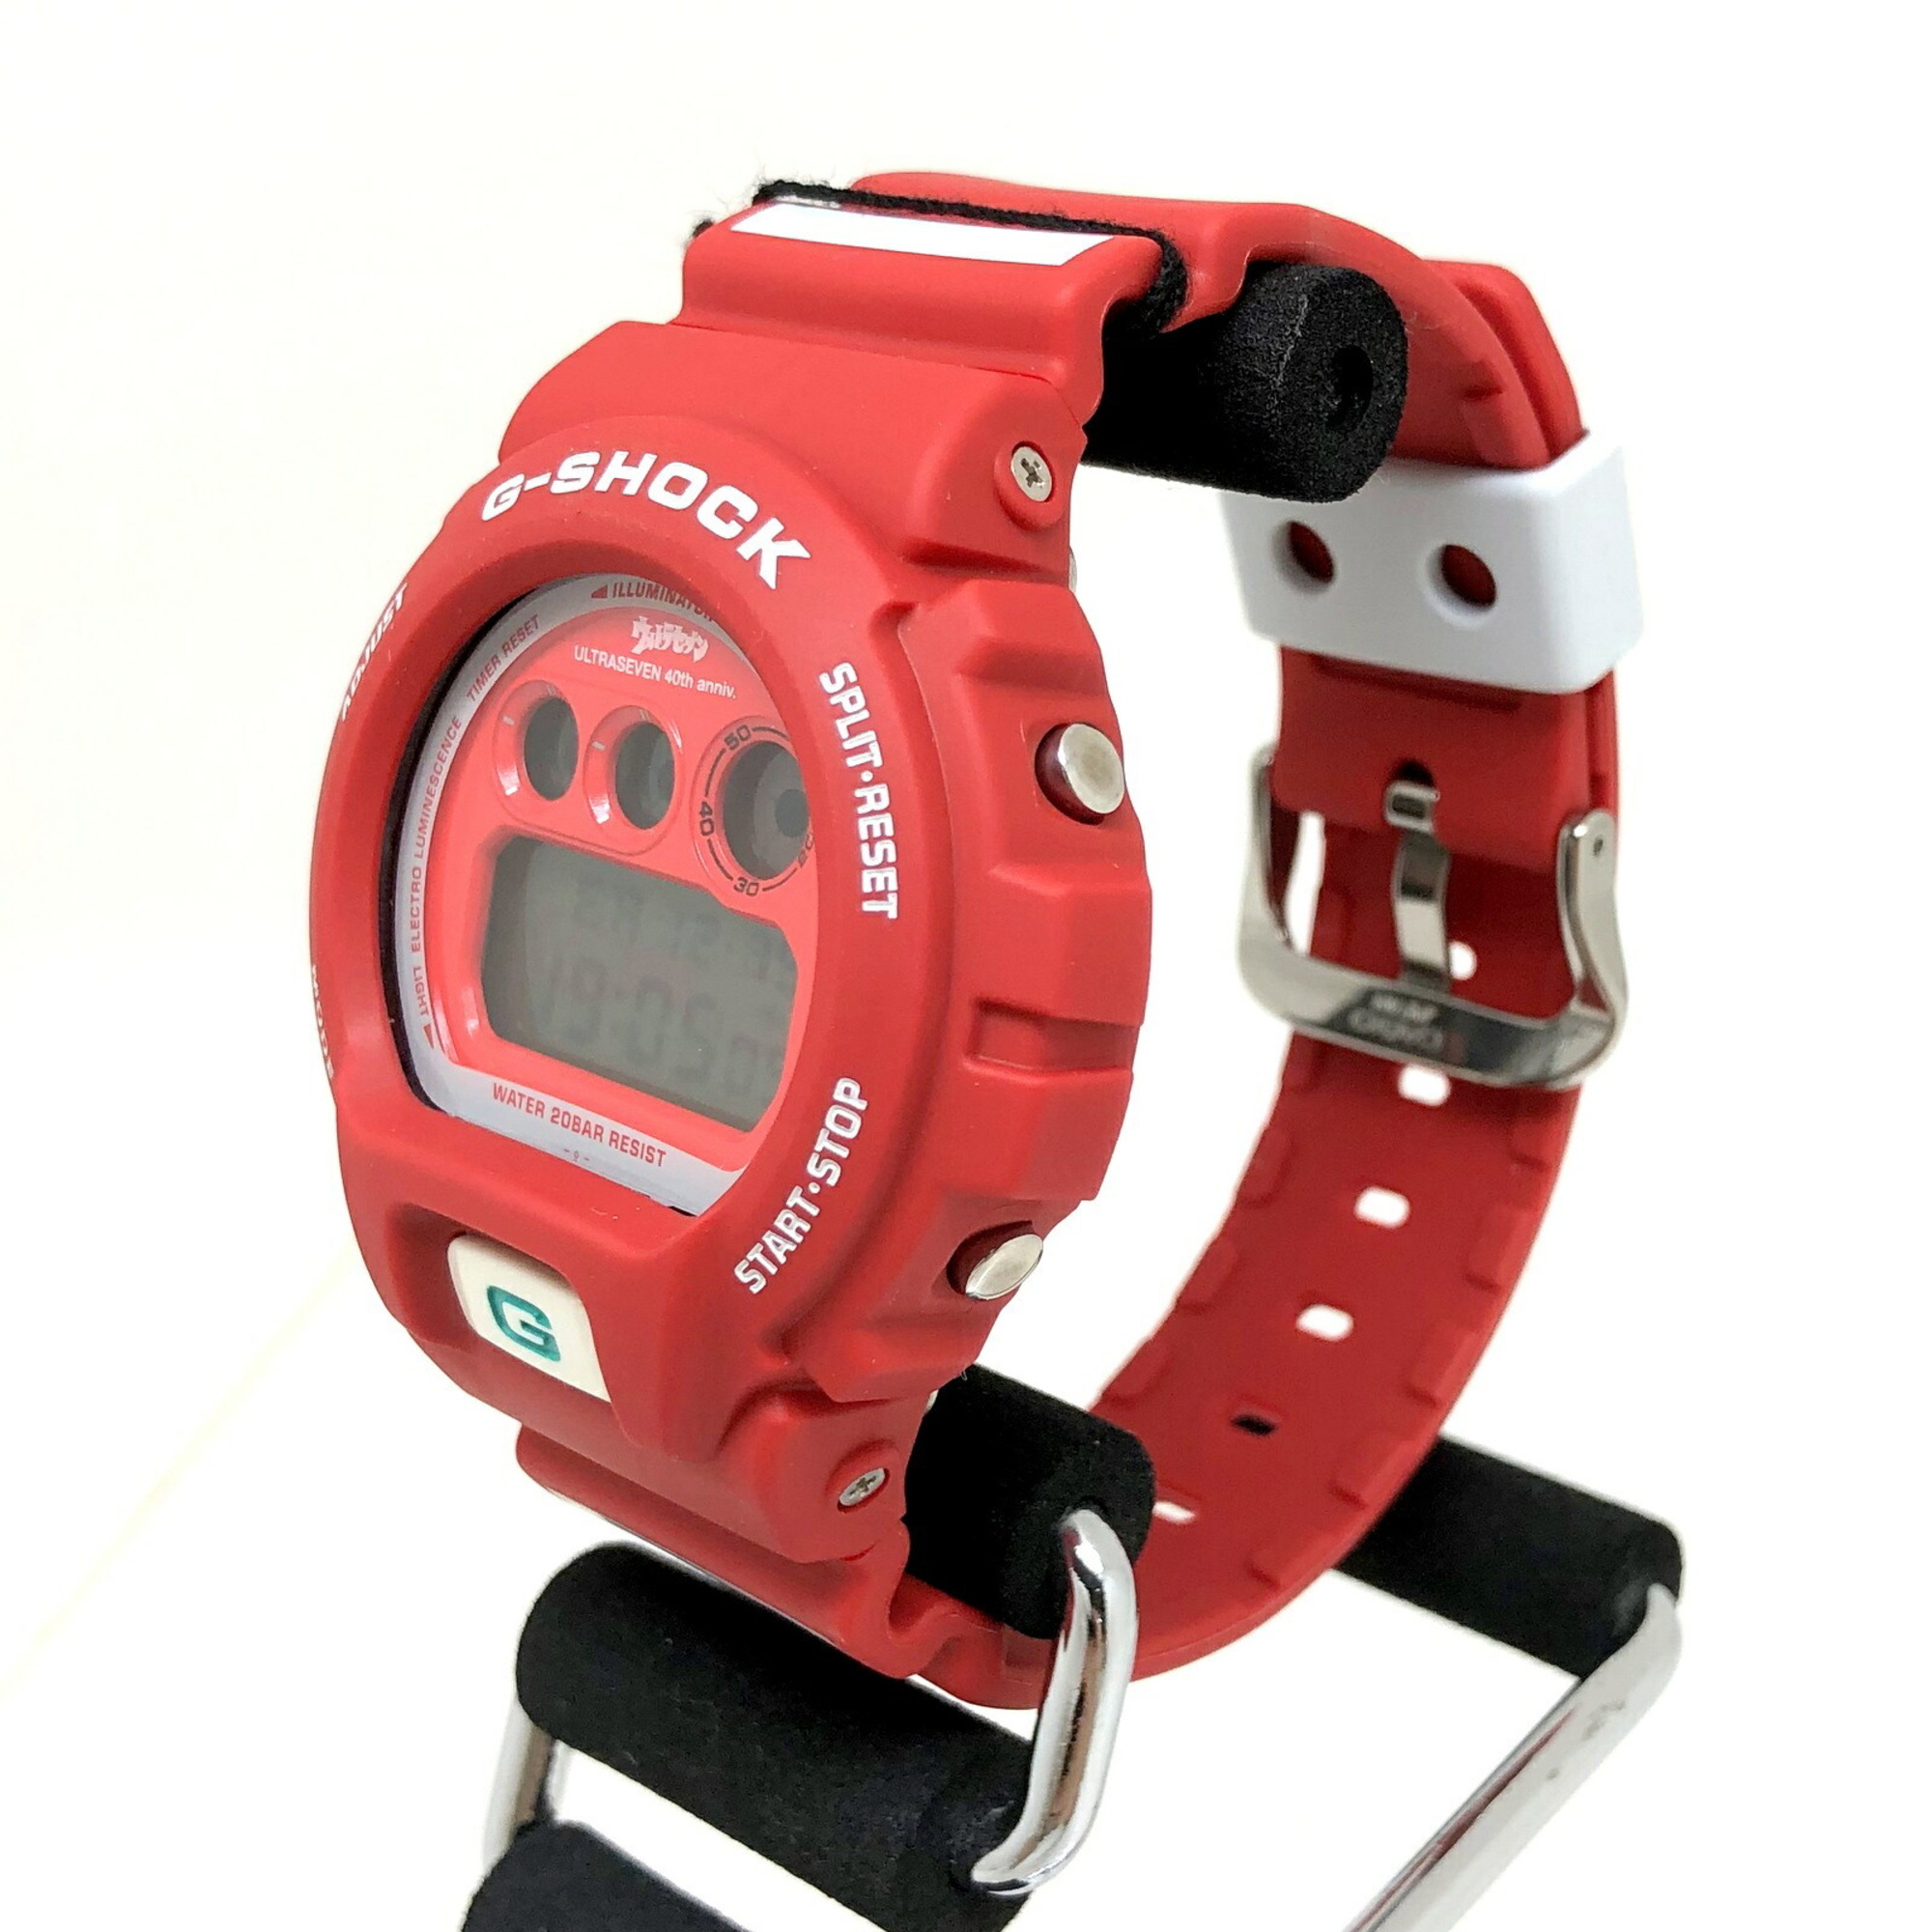 CASIO Casio G-SHOCK Watch DW-6900BUL7-9JF Ultra Seven 40th Anniversary ULTRASEVEN KUBRICK SPECIAL EDITION Men's Three Eyes Red with Kubrick ITT0CECO9ROW